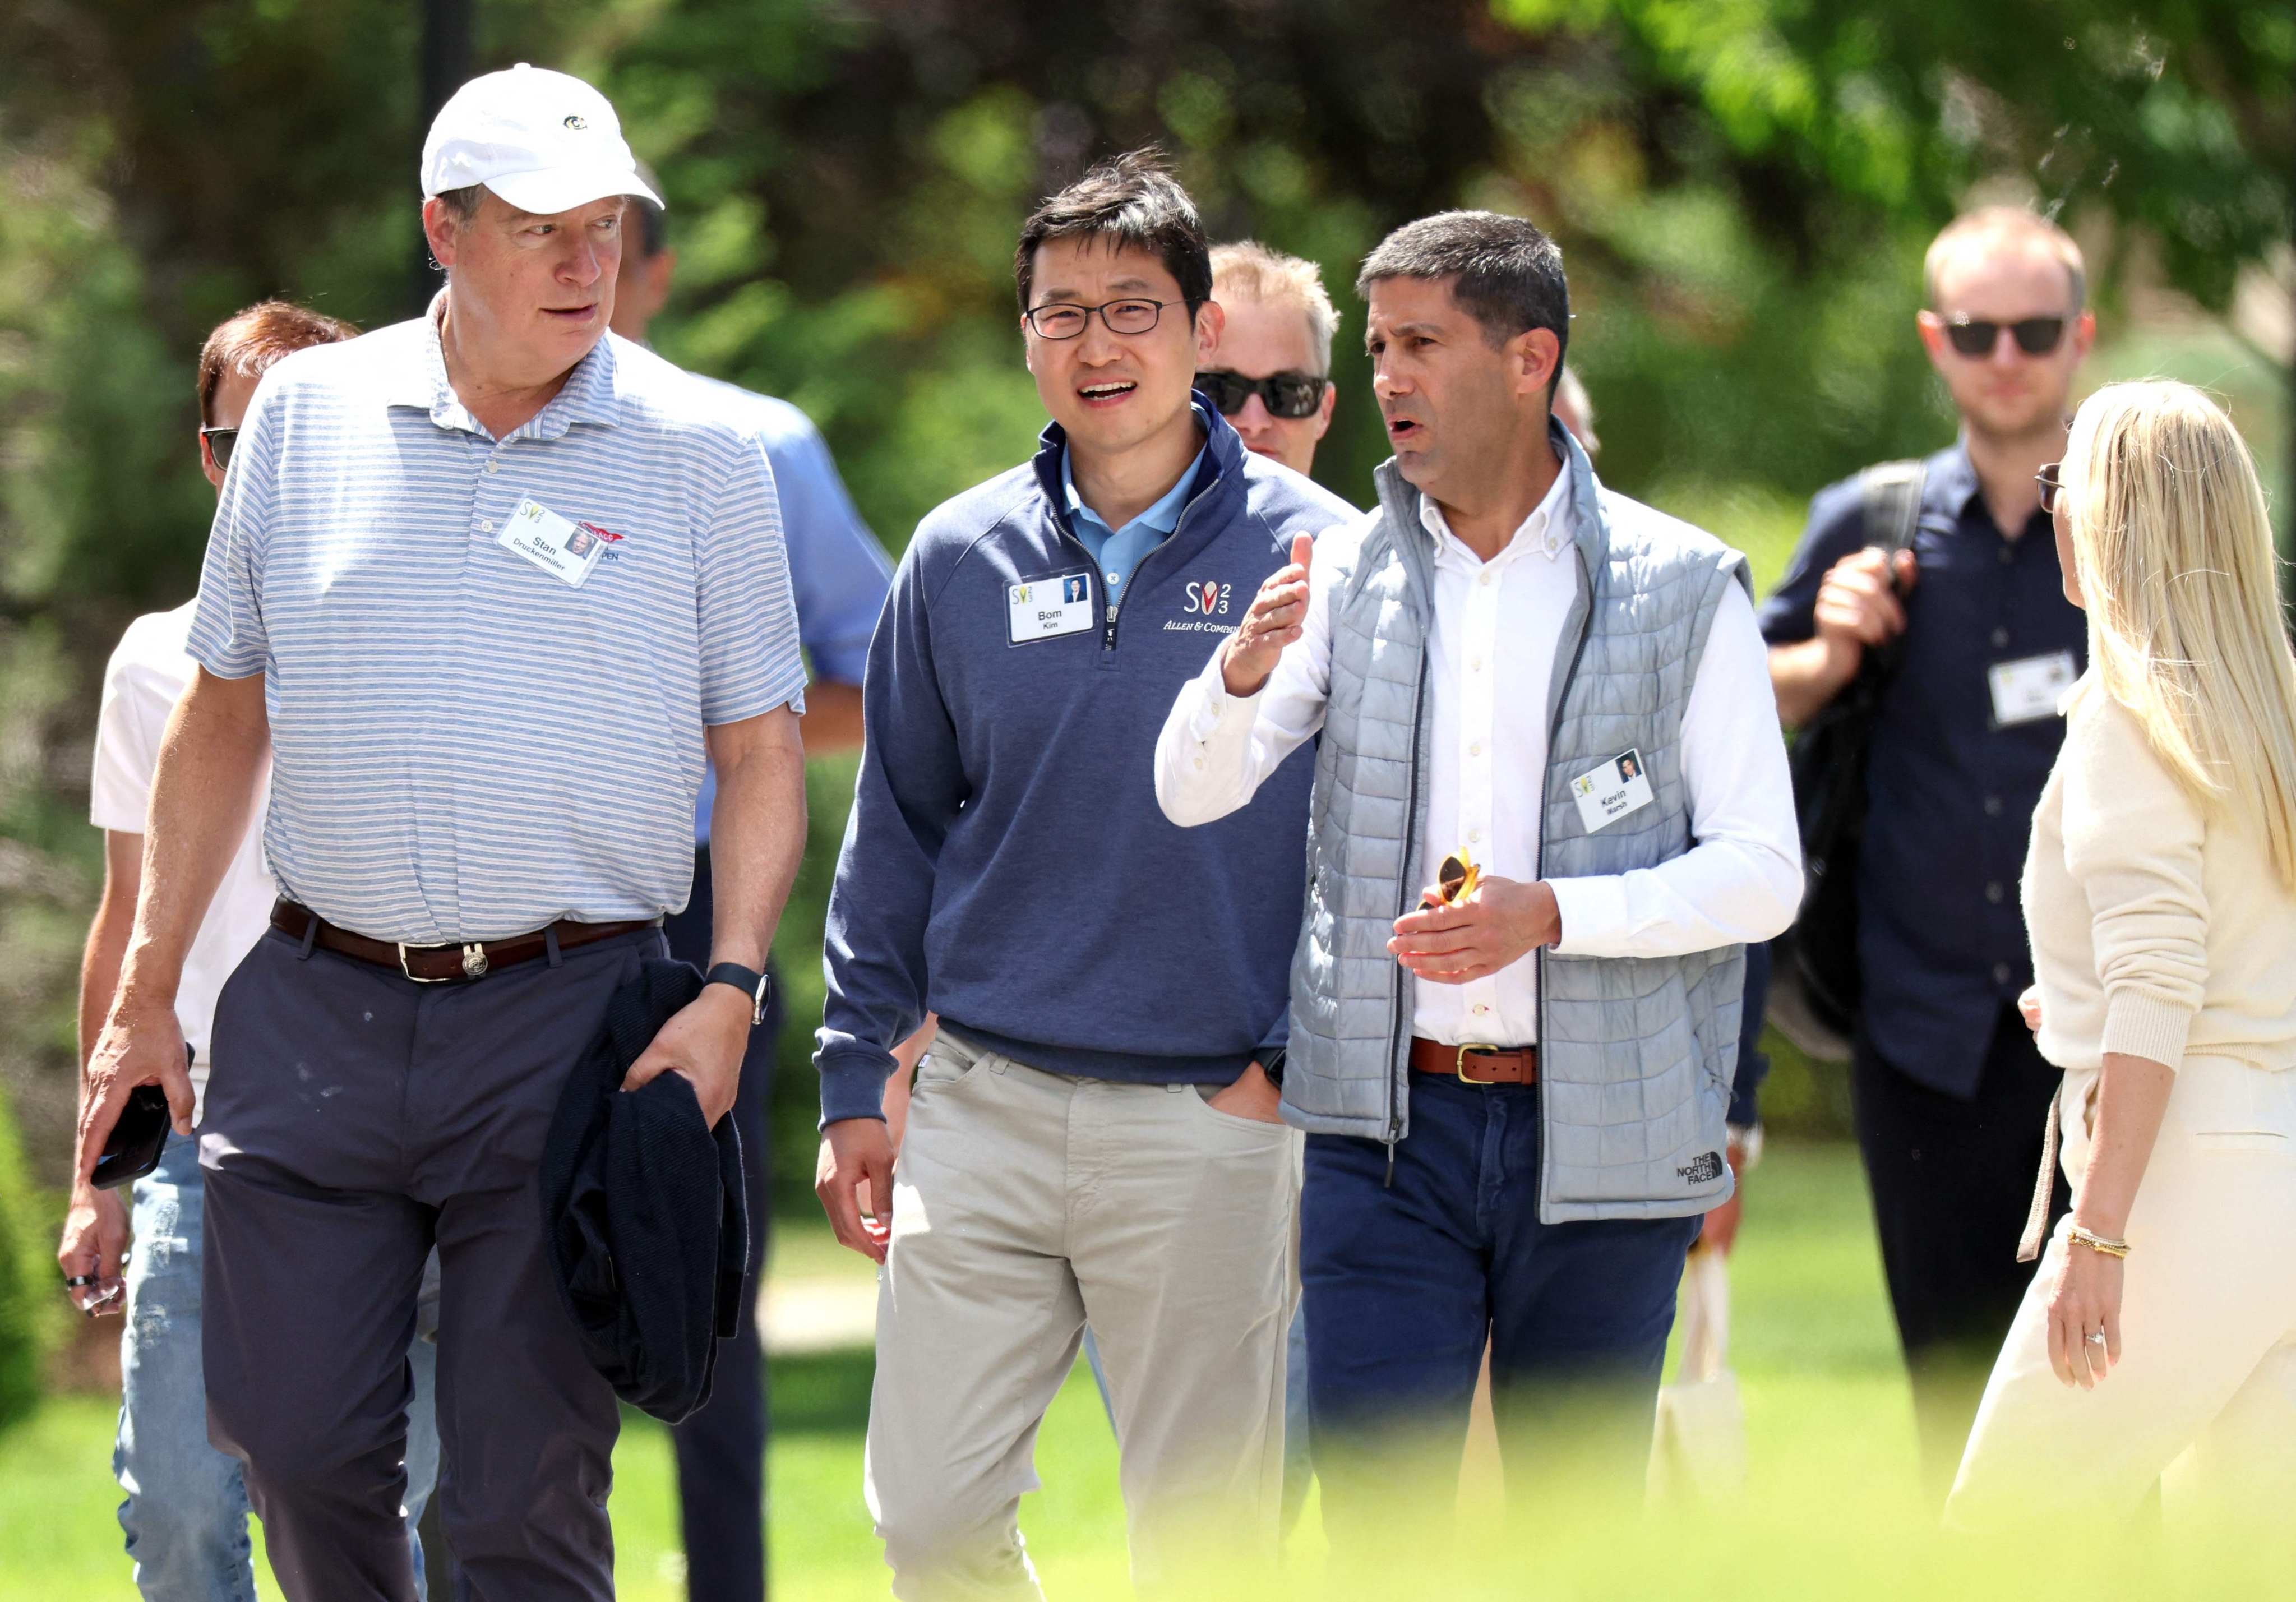 Stan Druckenmiller, Bom Kim and Kevin Warsh at the Allen & Company Sun Valley Conference 2023, where the world’s most wealthy and powerful figures from media, finance, technology and politics come together. Photo: Getty Images via AFP